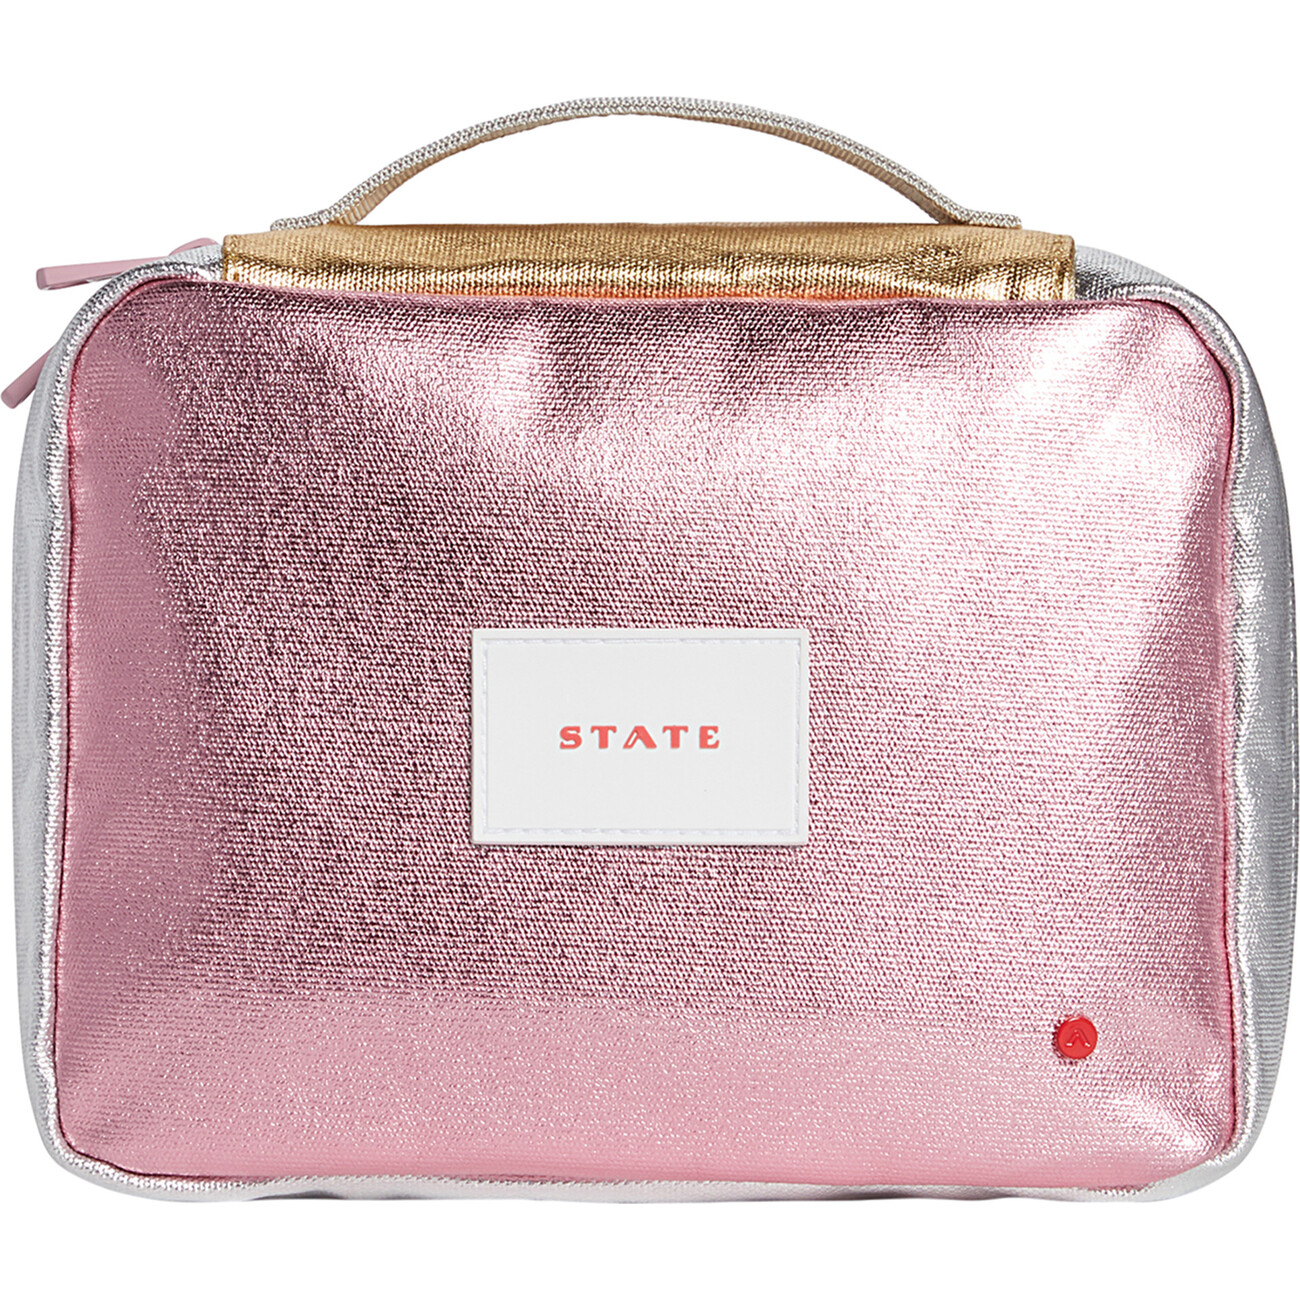 Bensen Dopp Kit, Pink and Silver - STATE Bags & Luggage